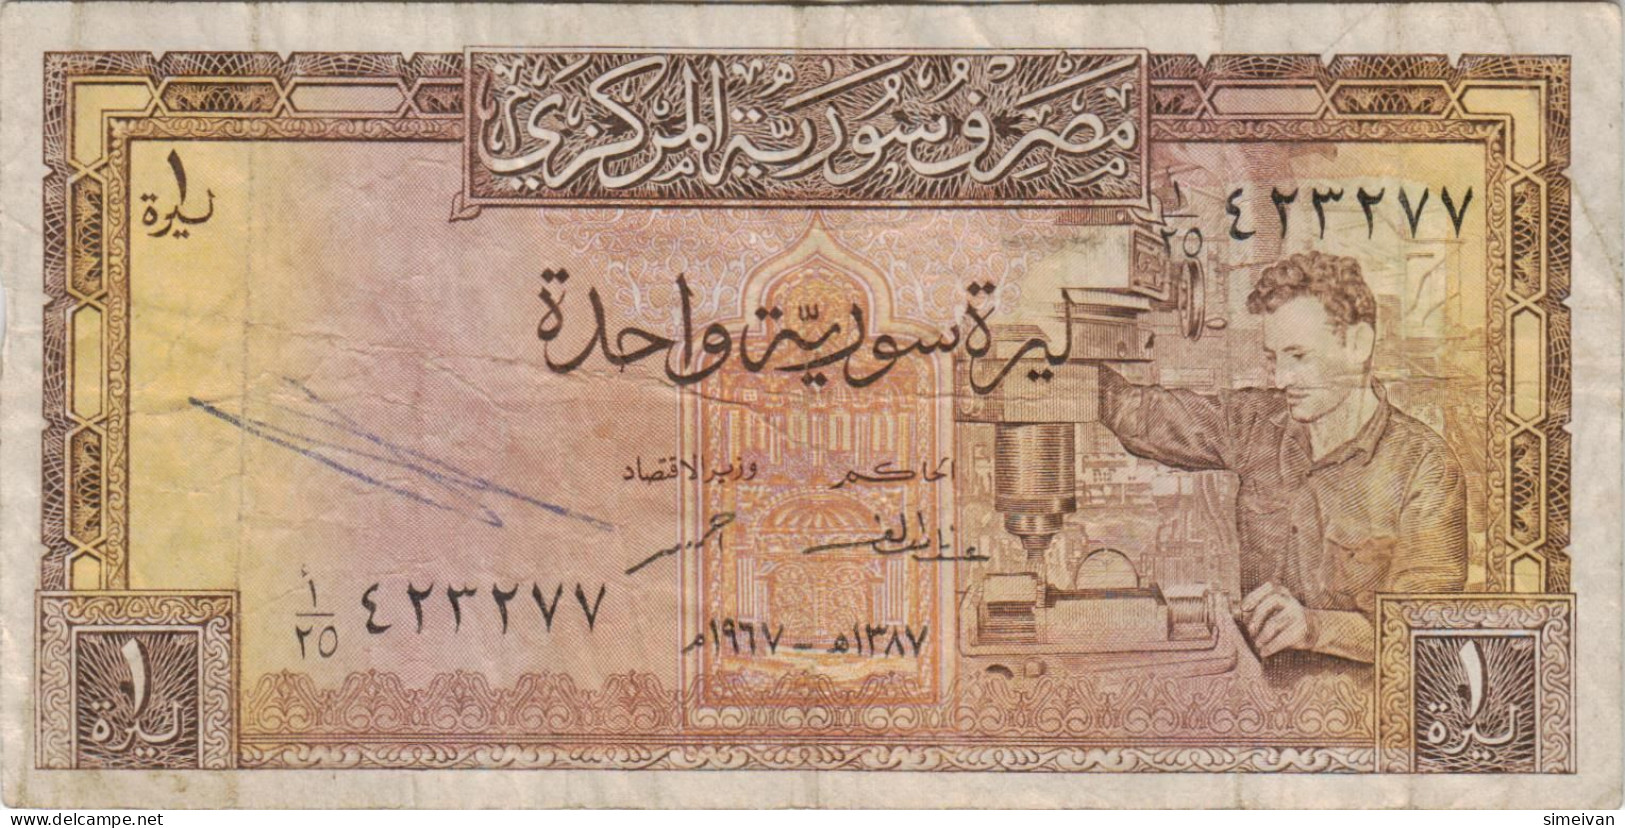 Syria 1 Pound 1967 P-93b Banknote Middle East Currency Syrie Syrien #5341 - Syrië